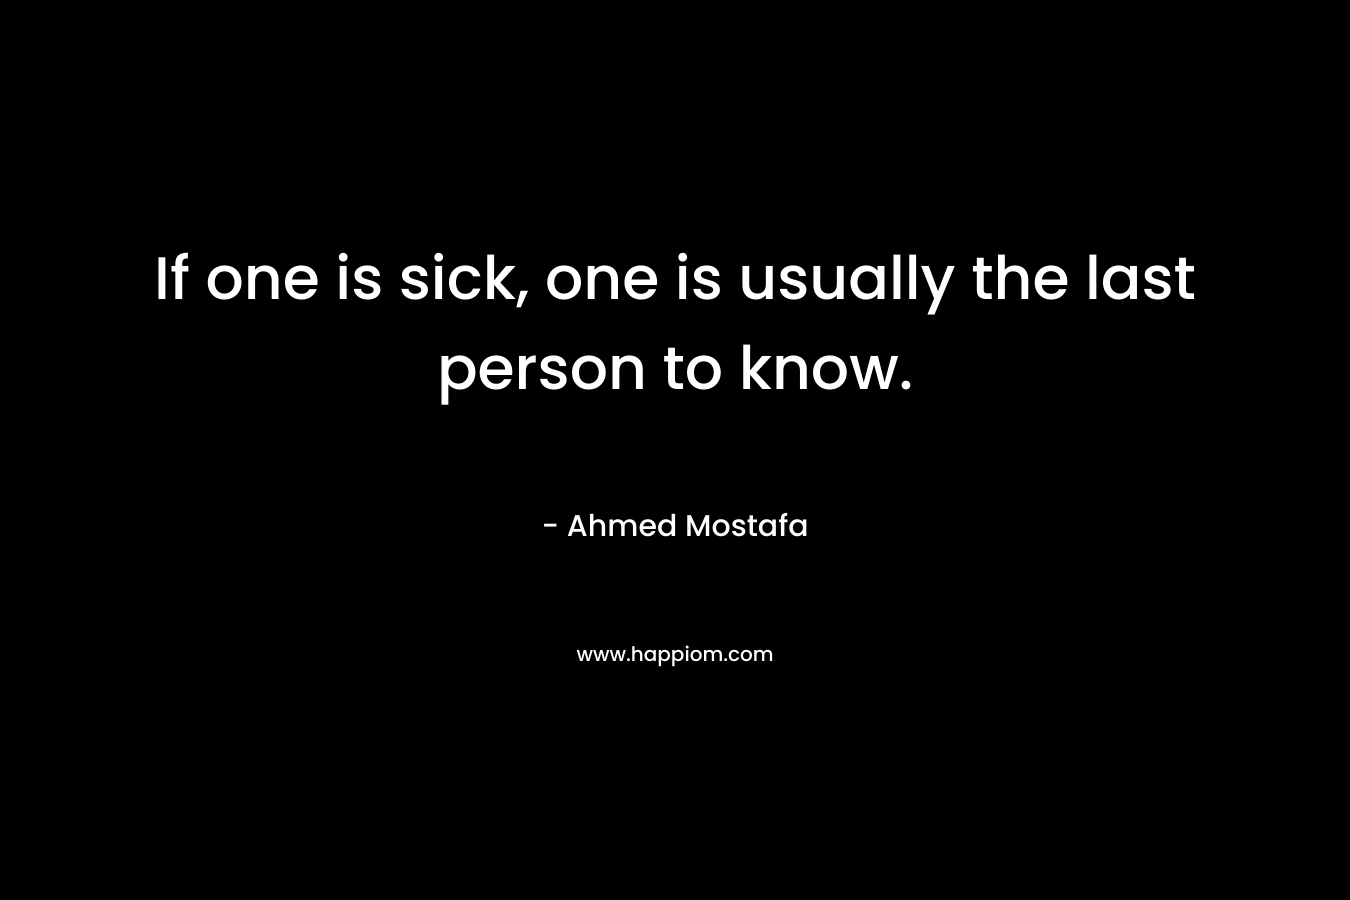 If one is sick, one is usually the last person to know.